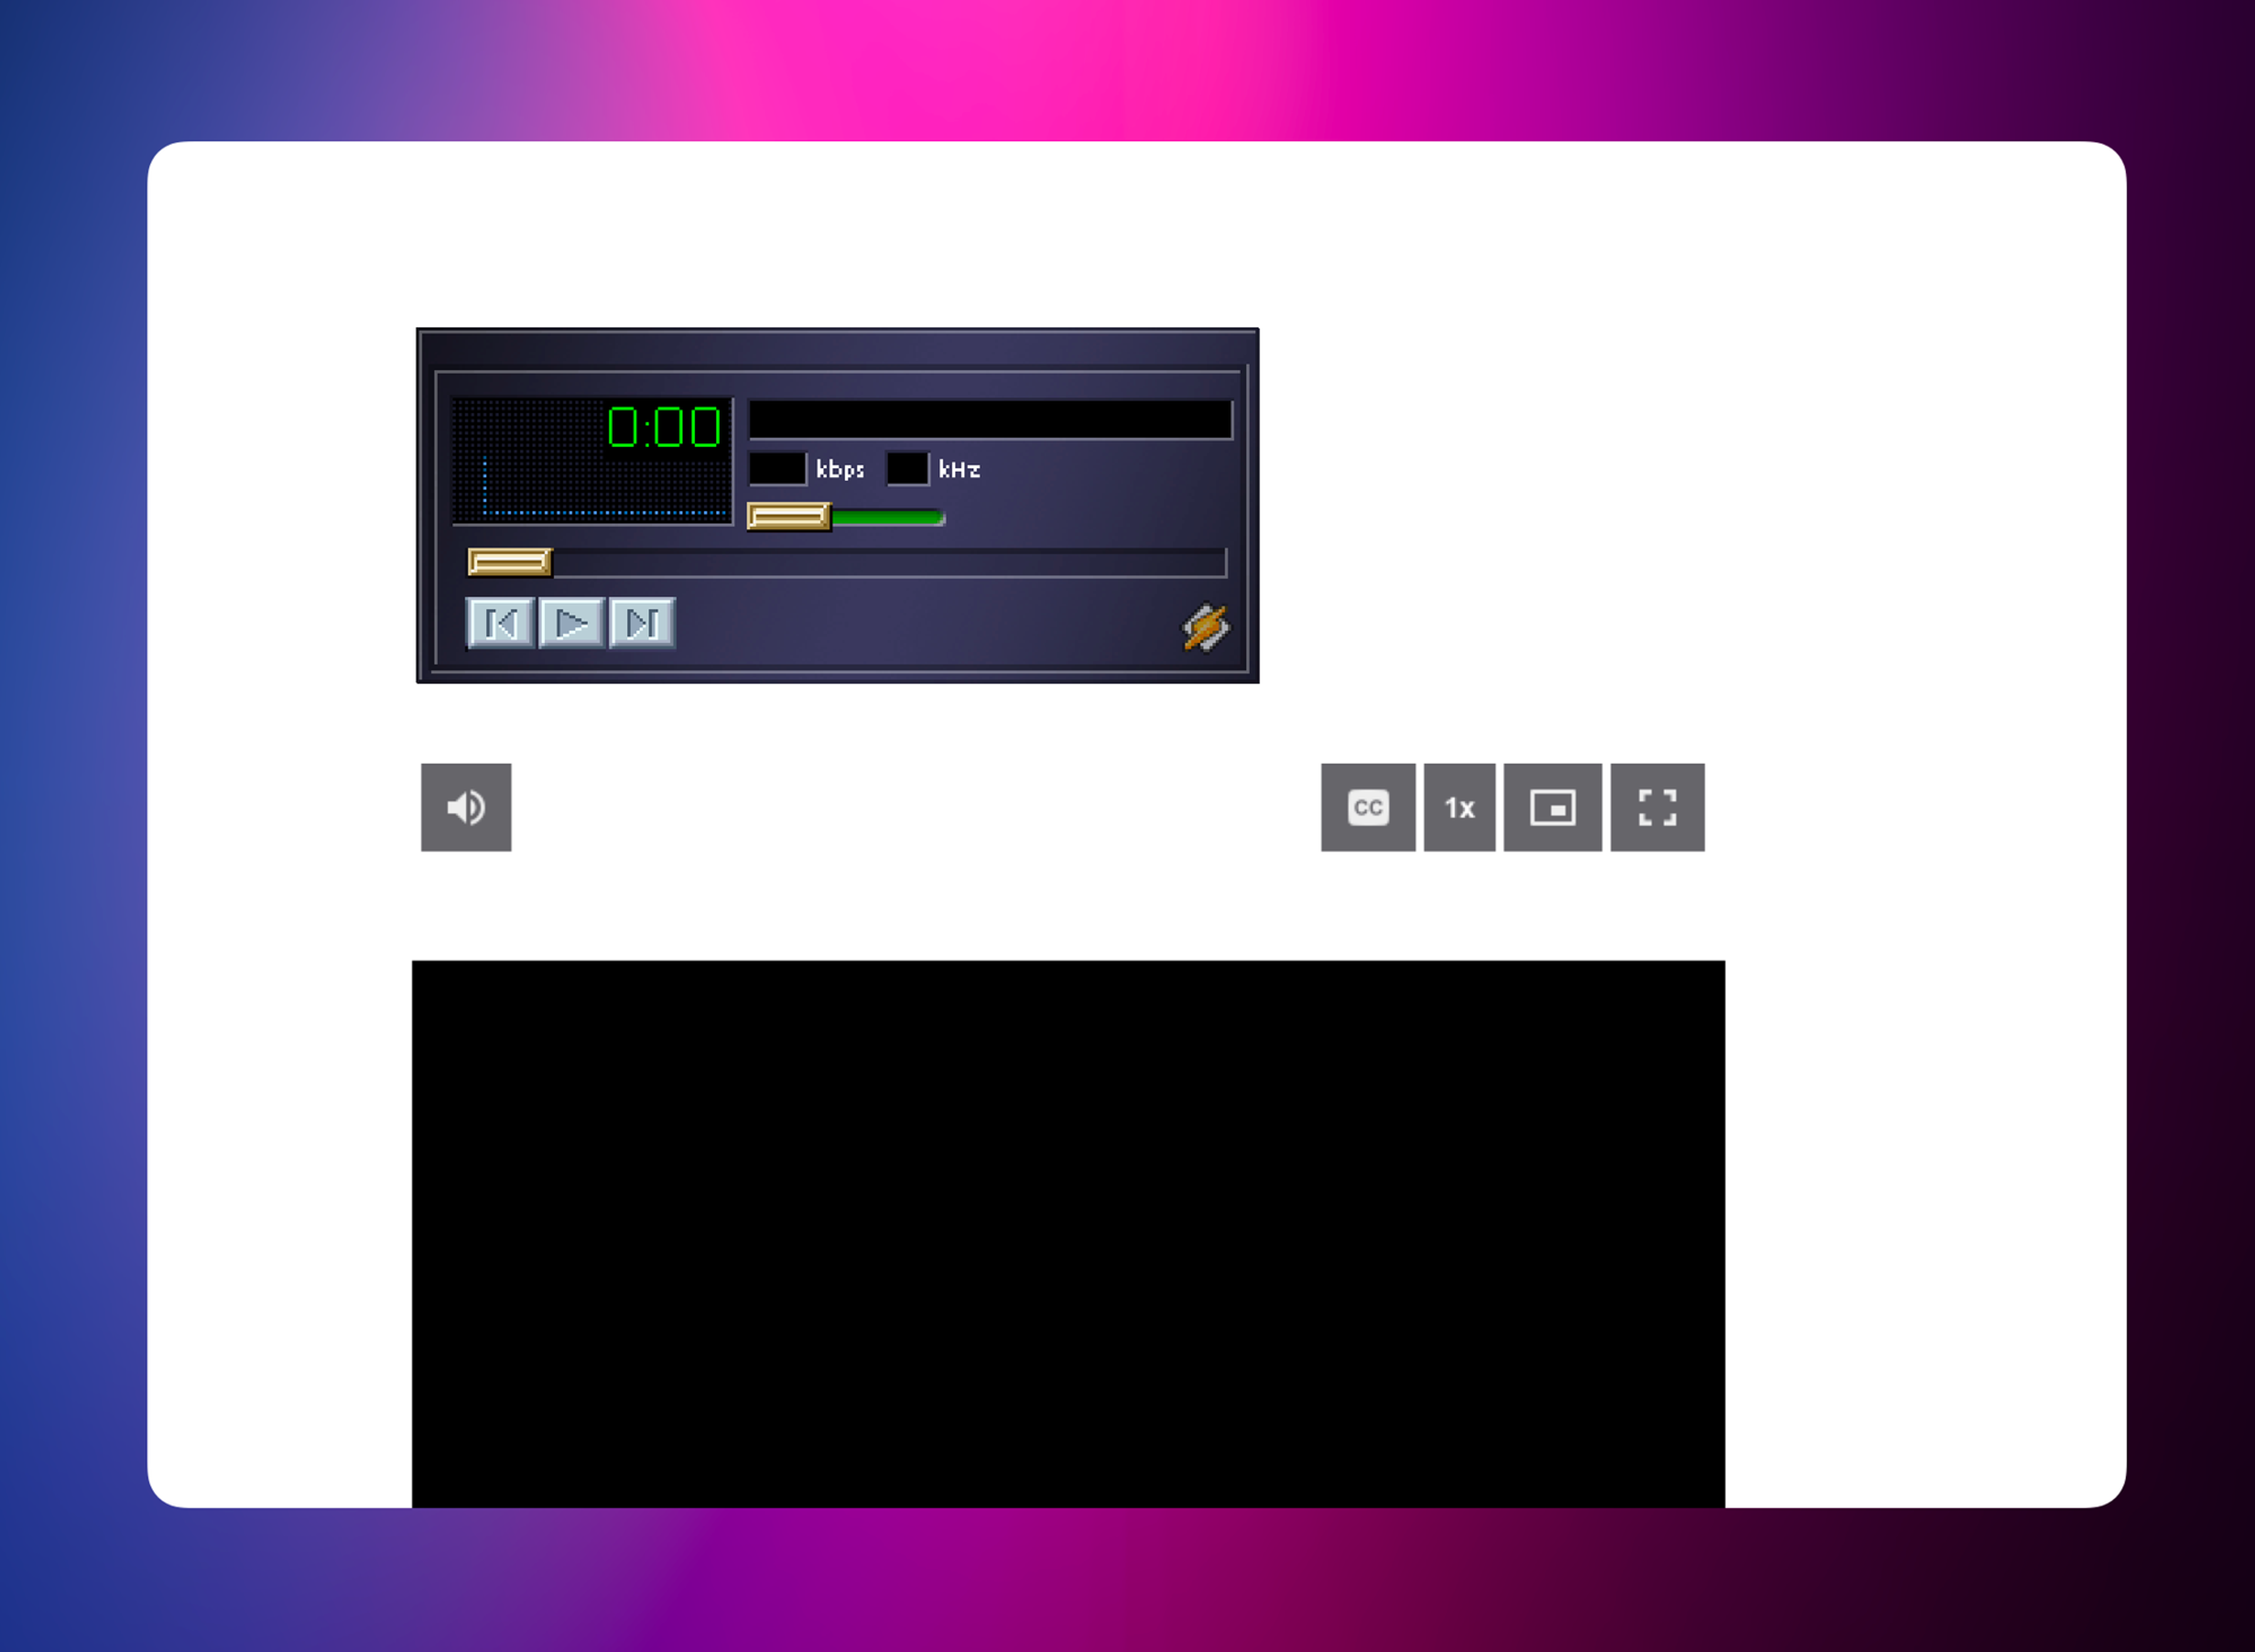 A screenshot of our project progress. We now have the volume slider in place and it's matching the original Winamp UI.